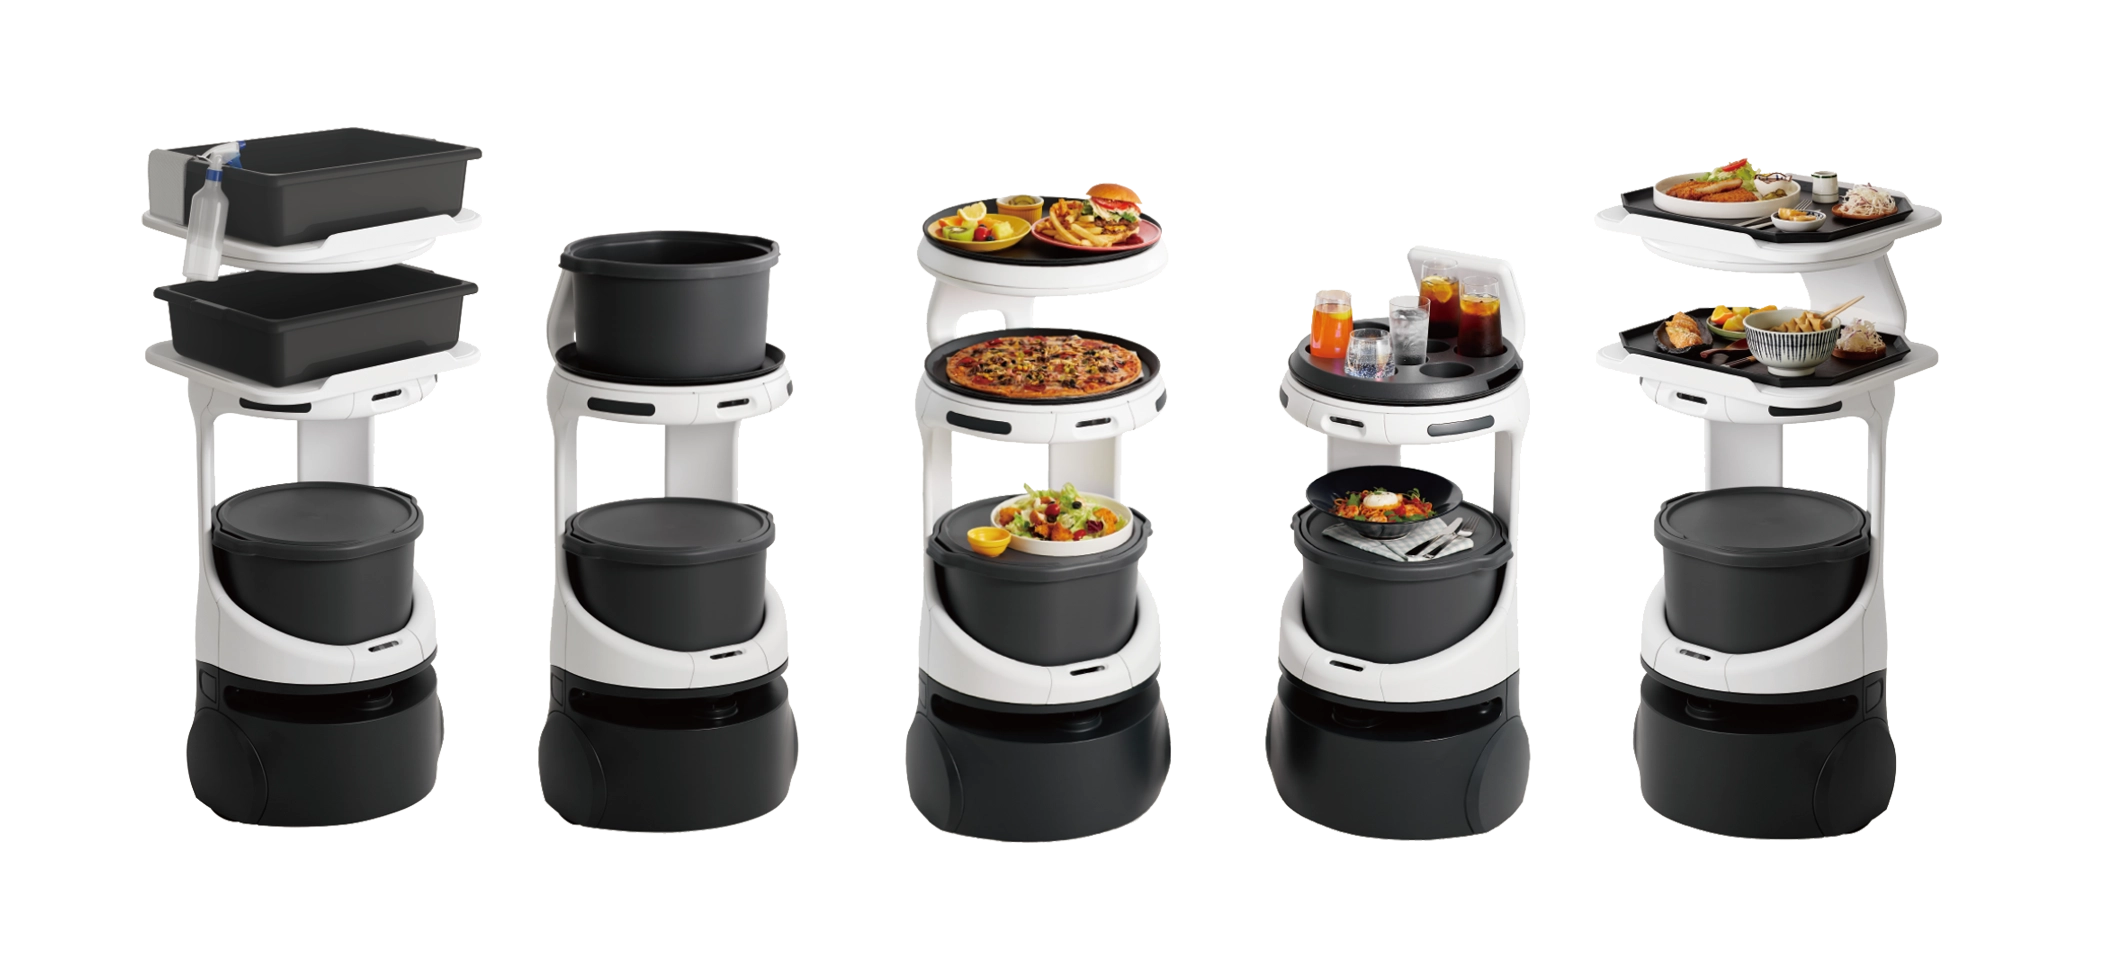 SERVI and SERVI MINI food service robot models from MetaDolce Technology